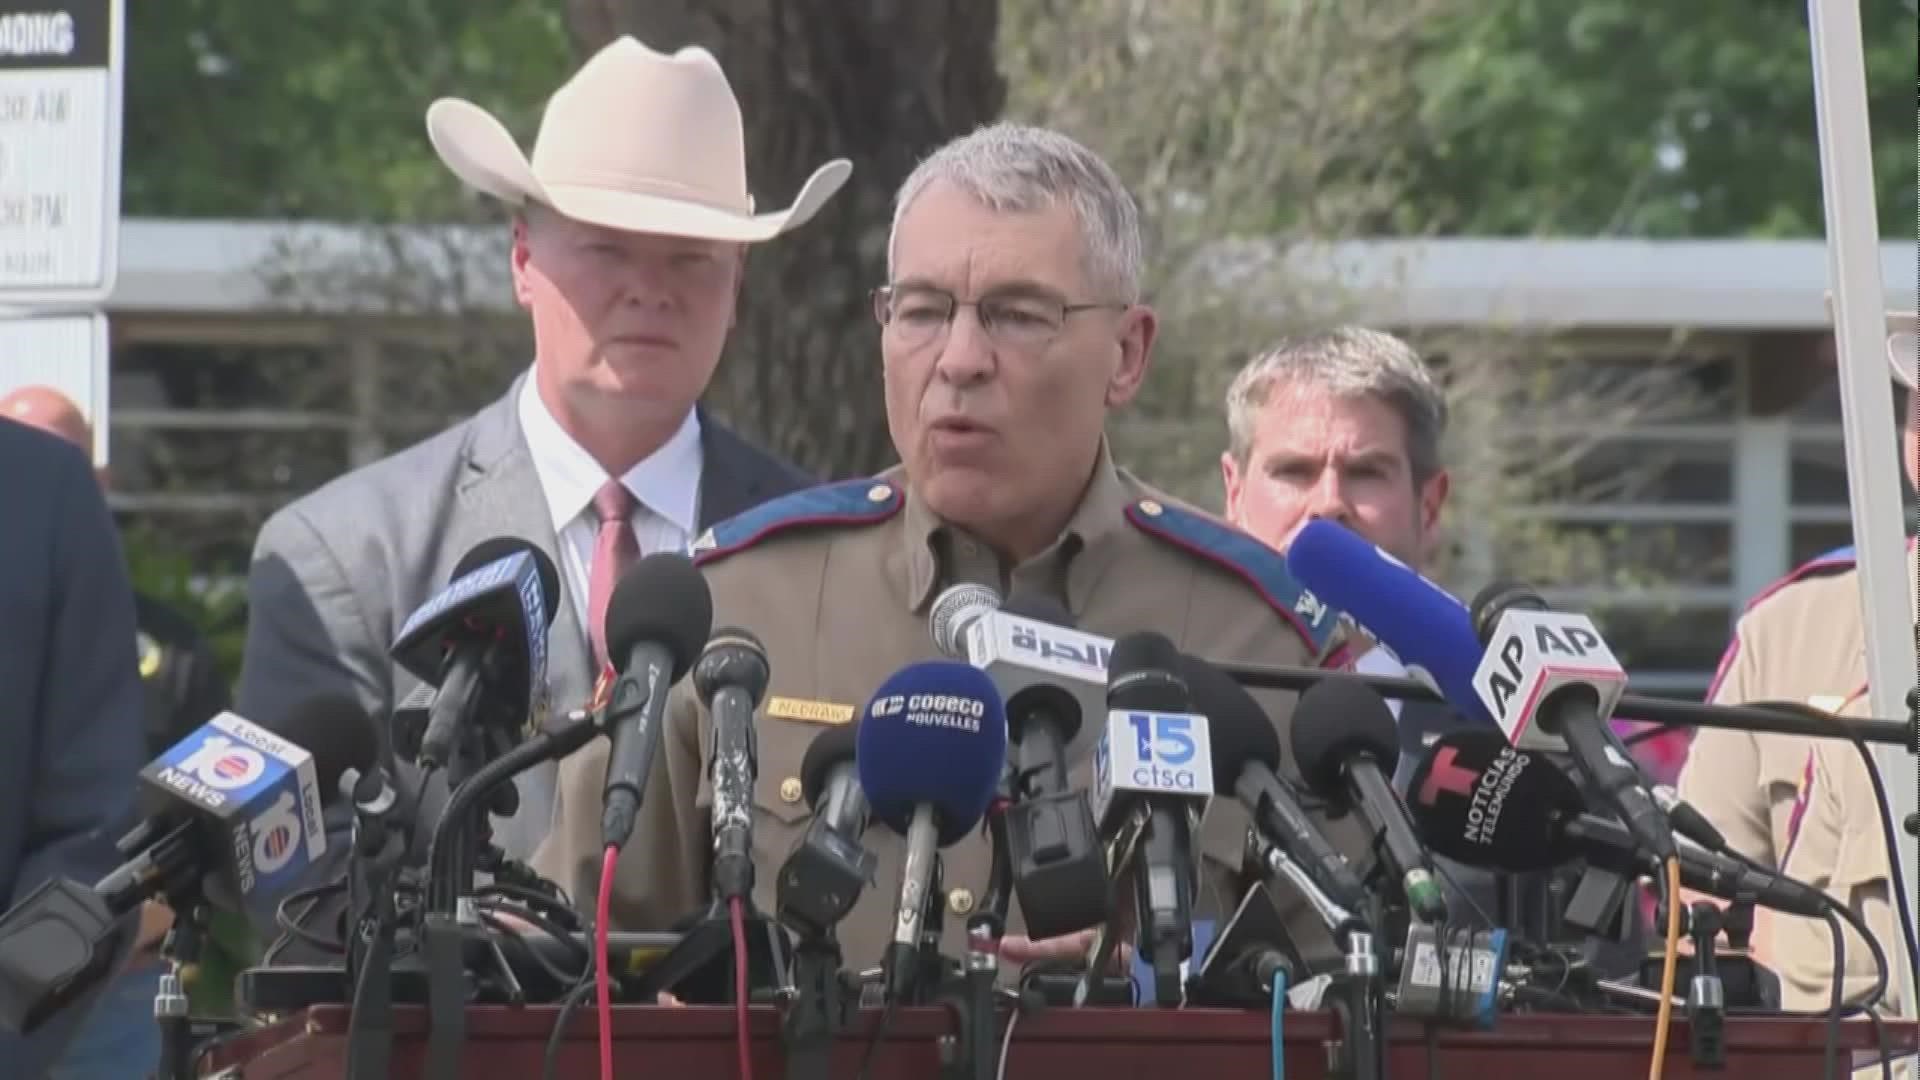 Texas DPS director Steven McCraw said it was the wrong decision for officers to not breach the classroom door.